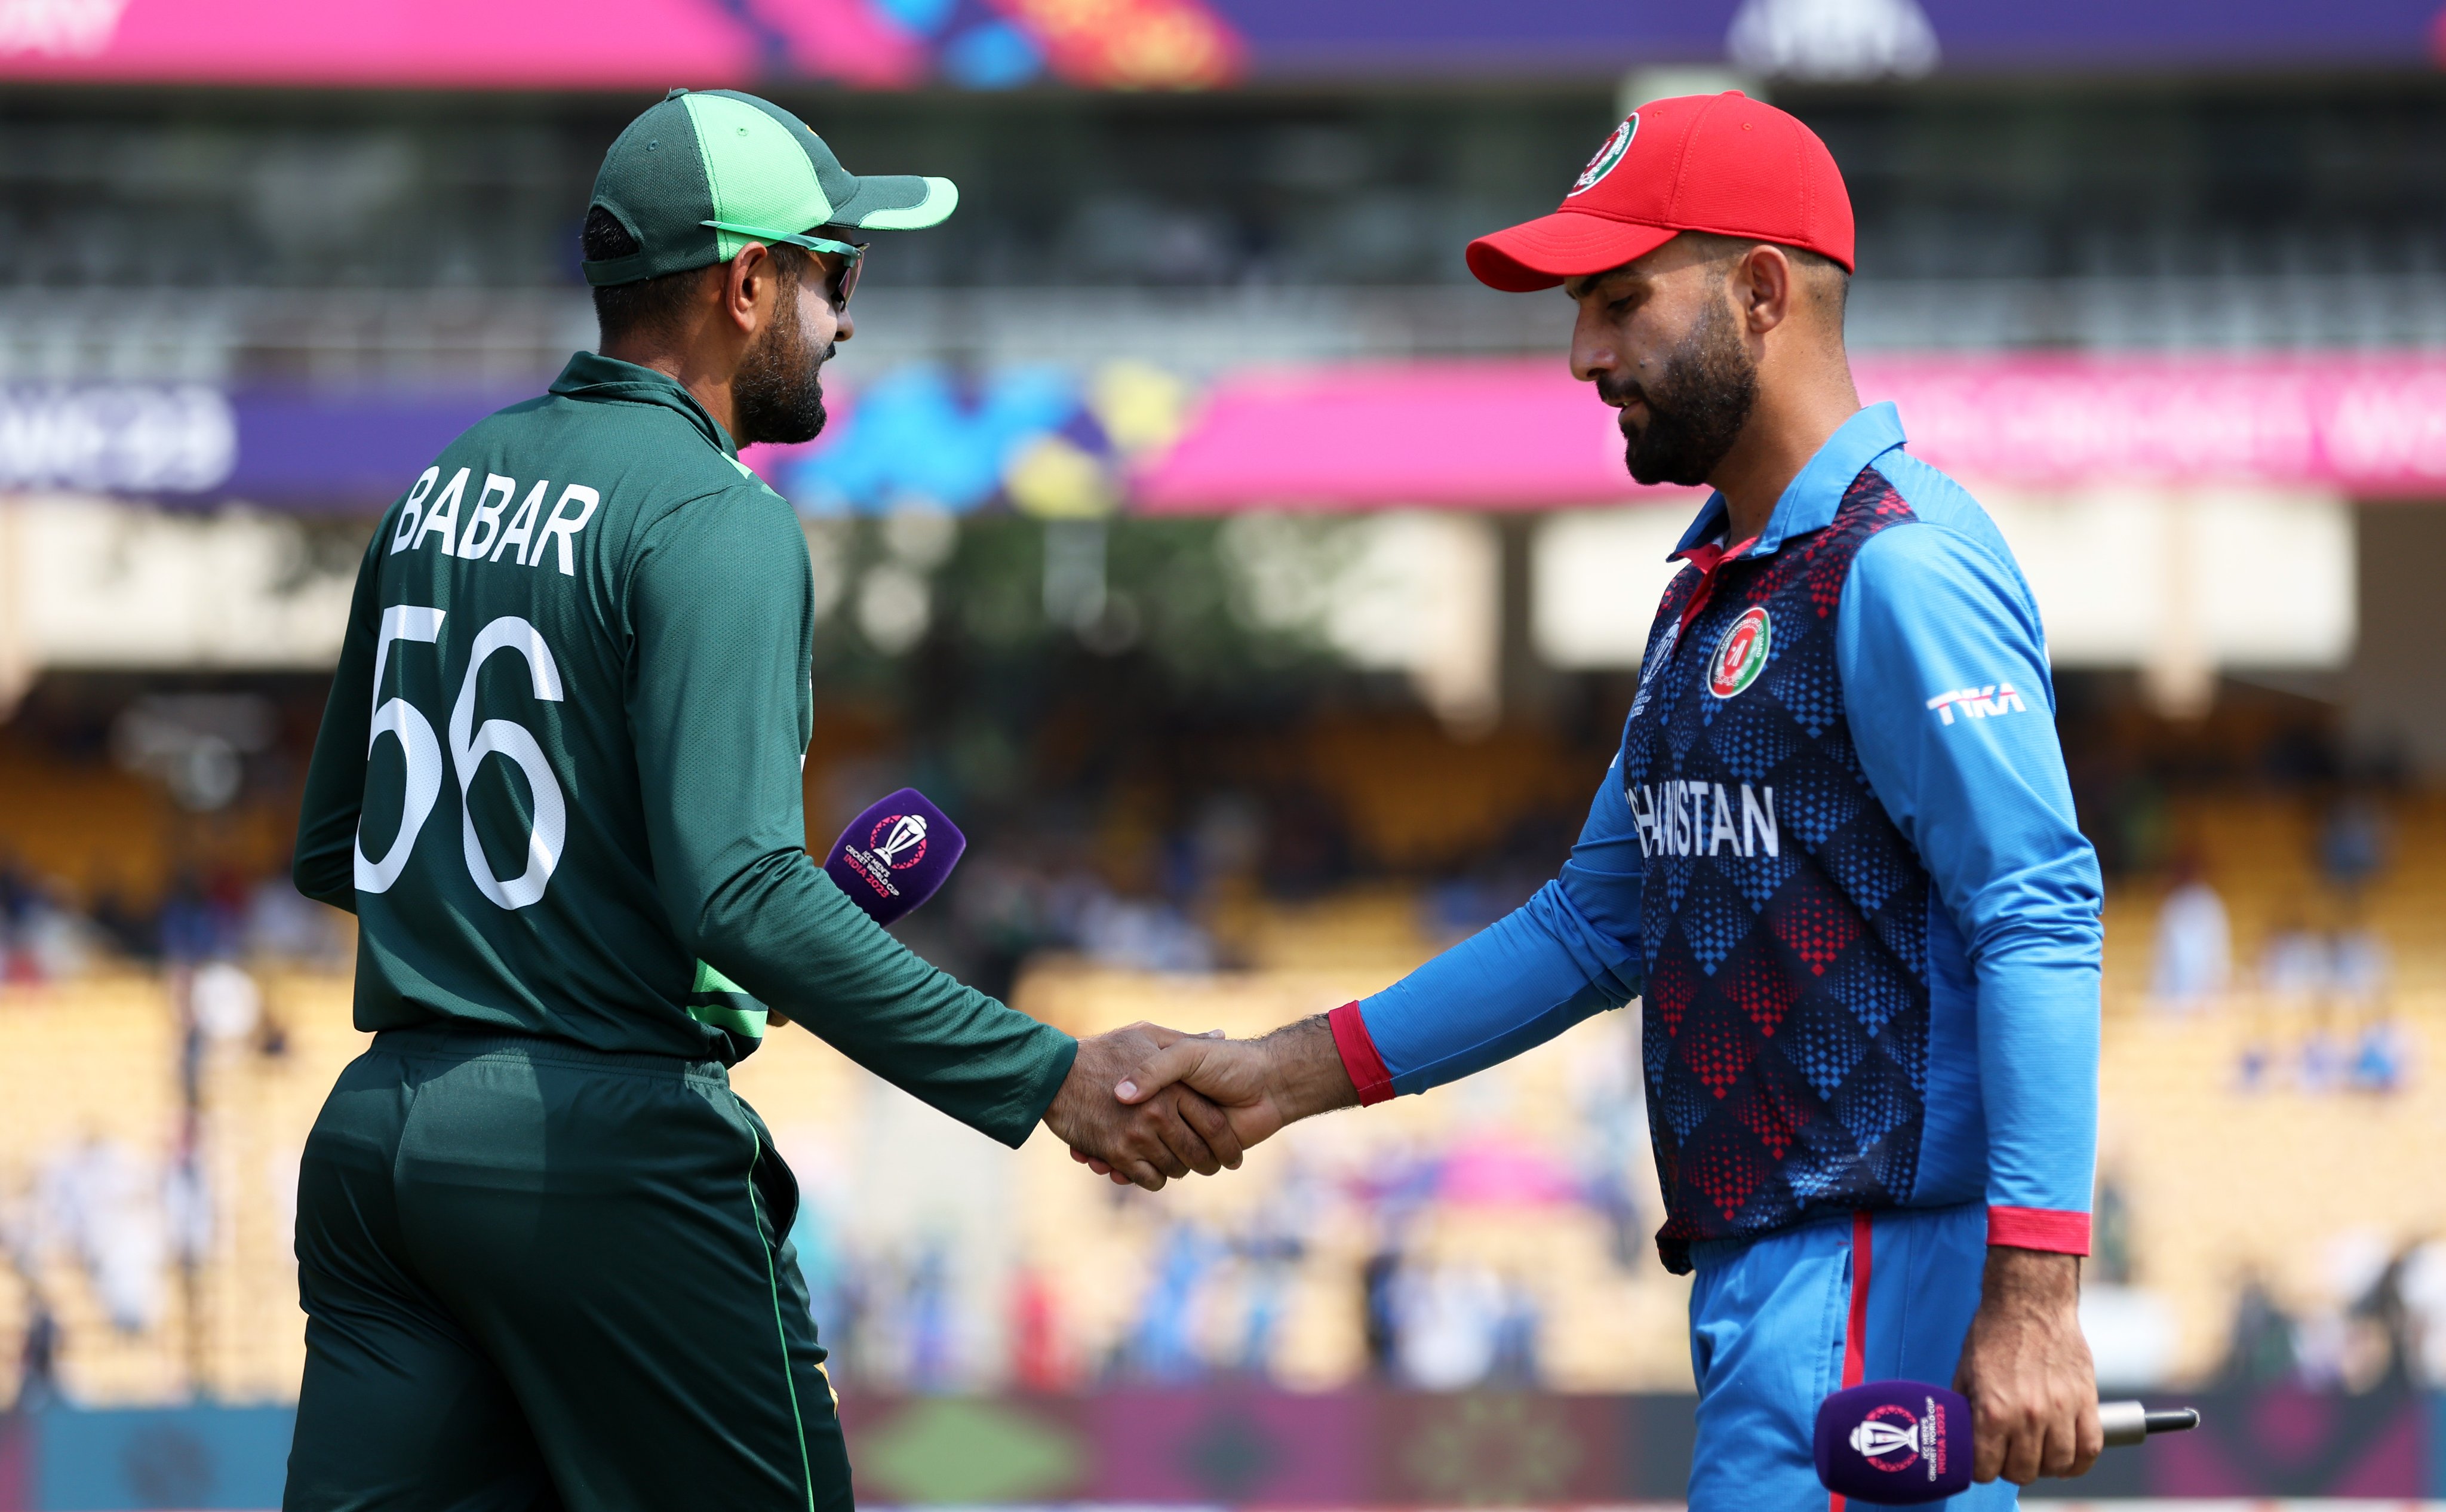 PAK vs AFG | Twitter in awe as Babar's respectful rejection of Nabi leads to wholesome moment on field